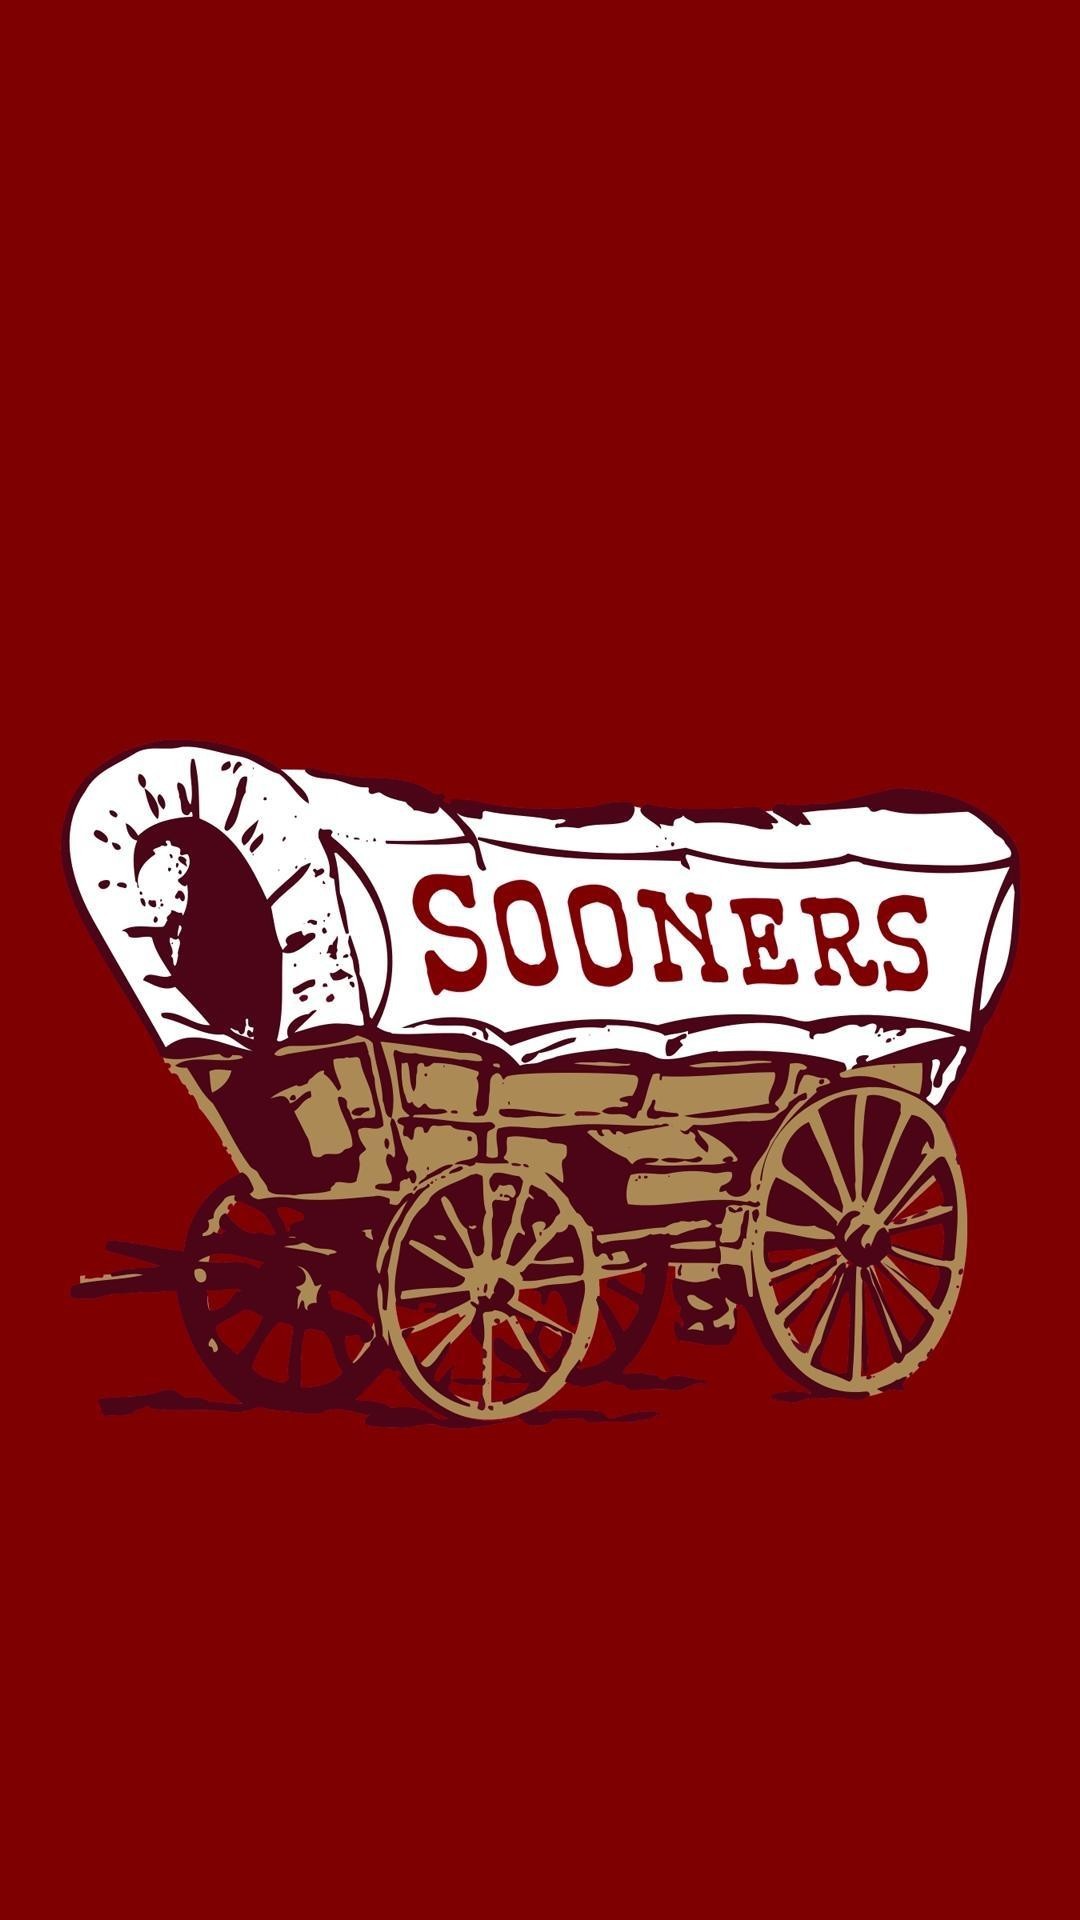 1080x1920 1920x1200 Oklahoma Sooners Chrome Wallpapers, Browser Themes and More  Oklahoma State University Wallpapers Wallpapers)